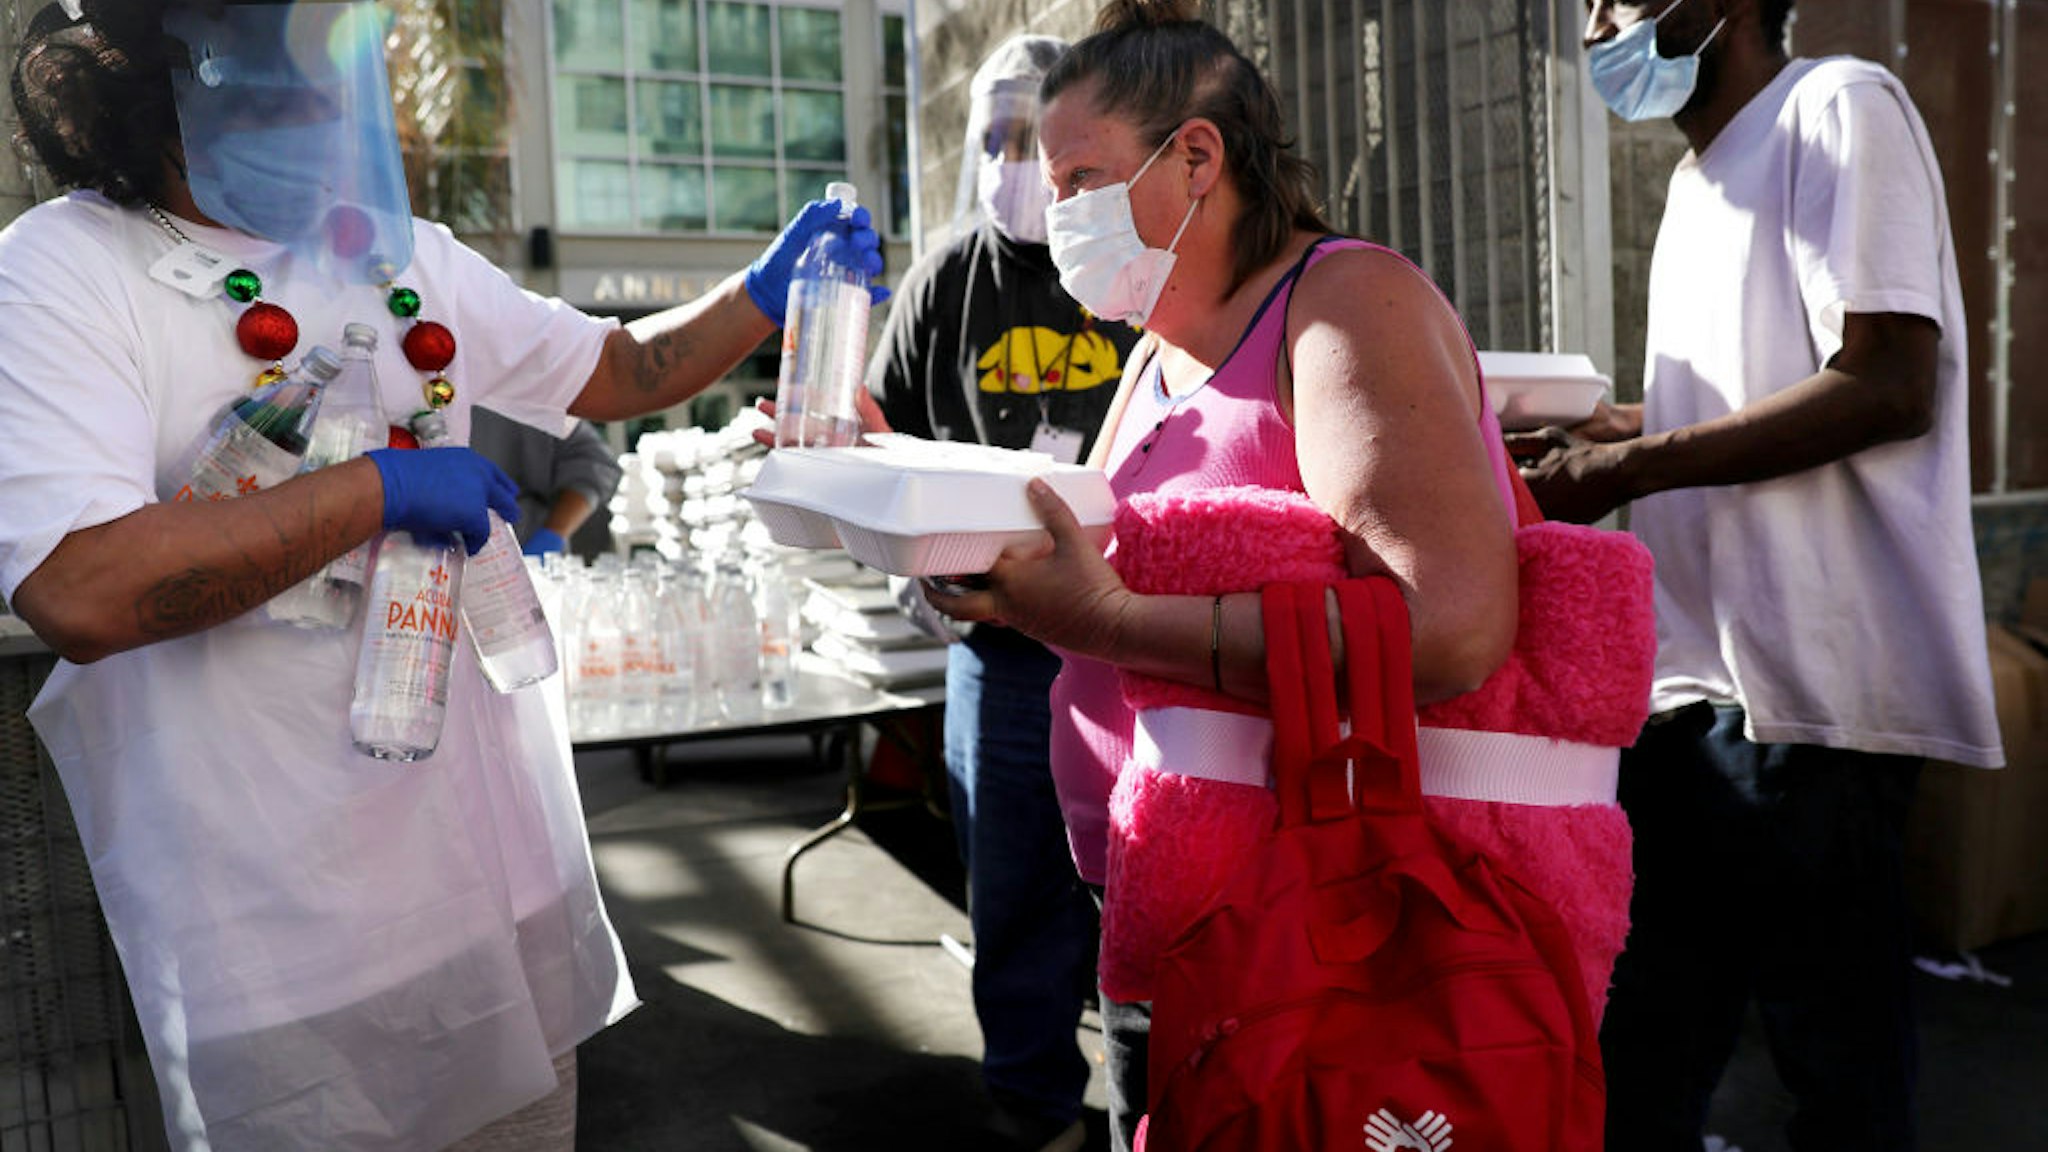 People receive a holiday-themed takeout meal from the Midnight Mission in Skid Row on Christmas day amid the COVID-19 pandemic on December 25, 2020 in Los Angeles, California.